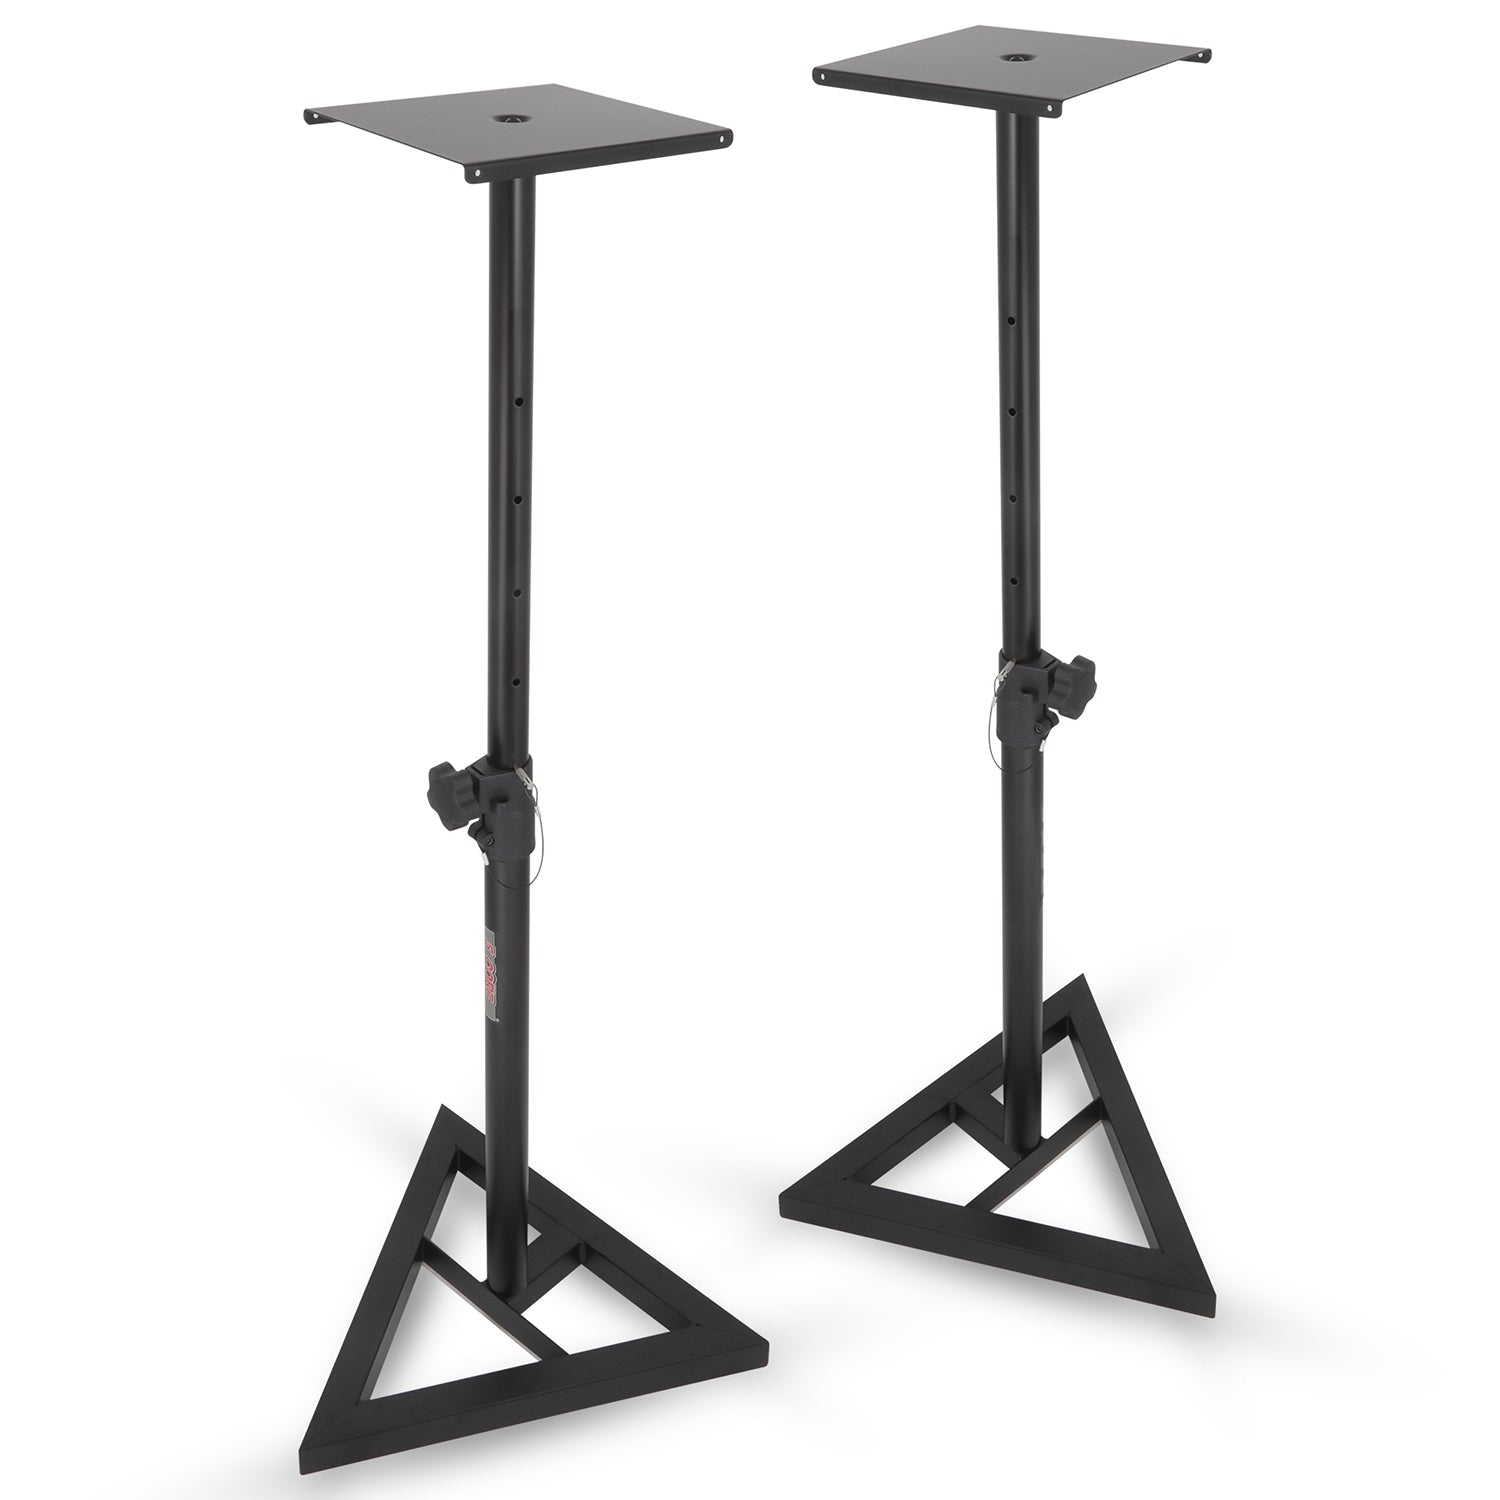 5 Core Speaker Stand Triangle Base Tall Adjustable 35mm DJ Studio Monitor Stands Pole Mount